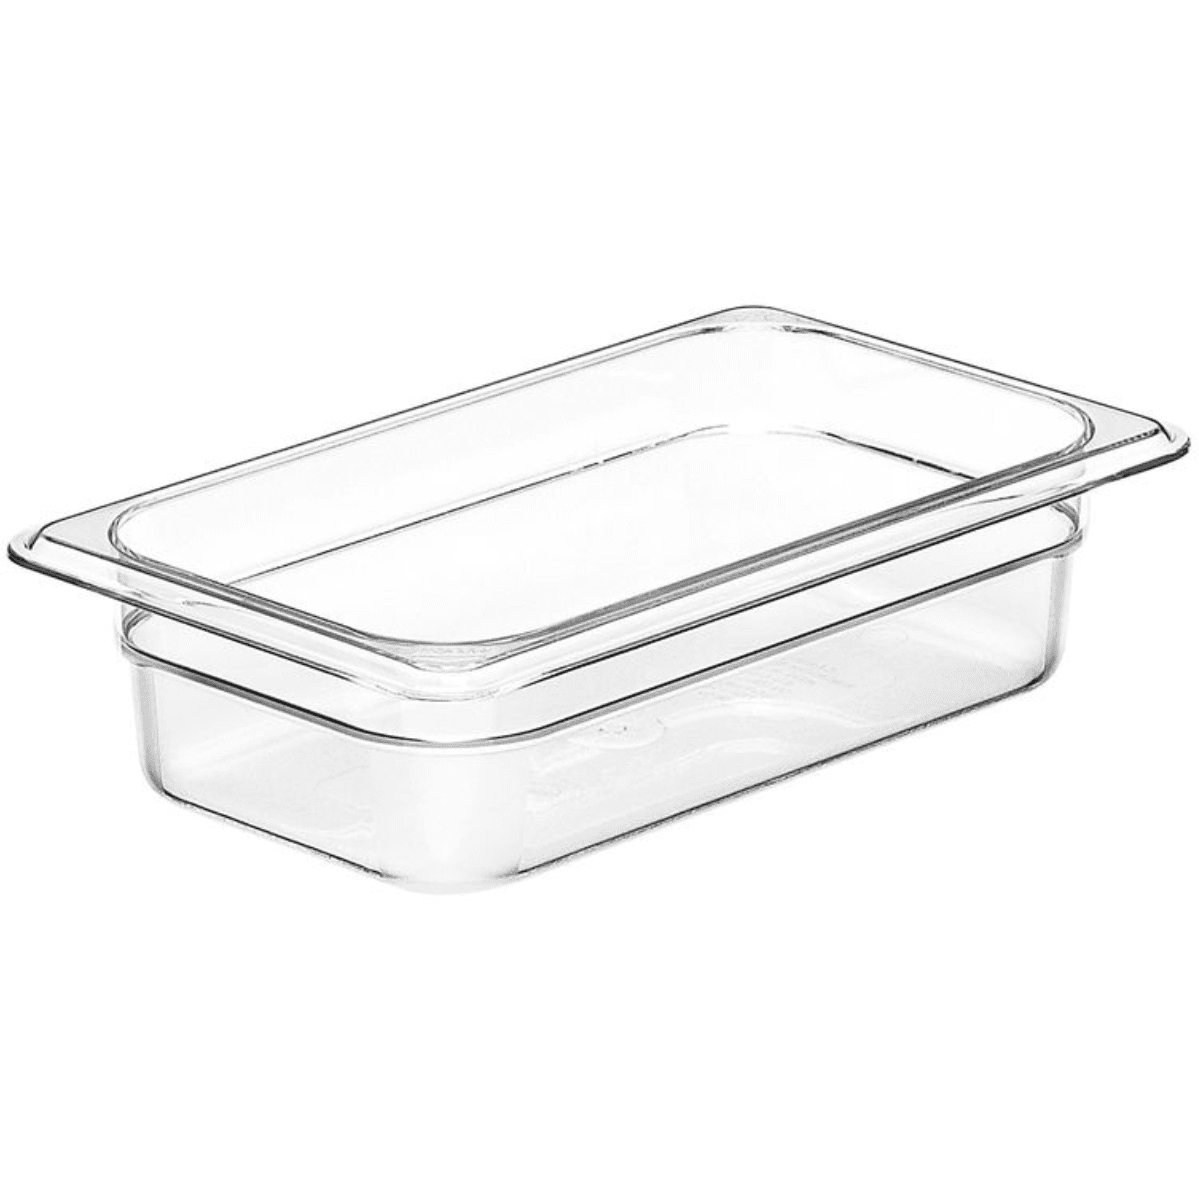 Cambro 65mm Deep 1/4GN Clear Polycarbonate Gastronorm Pan